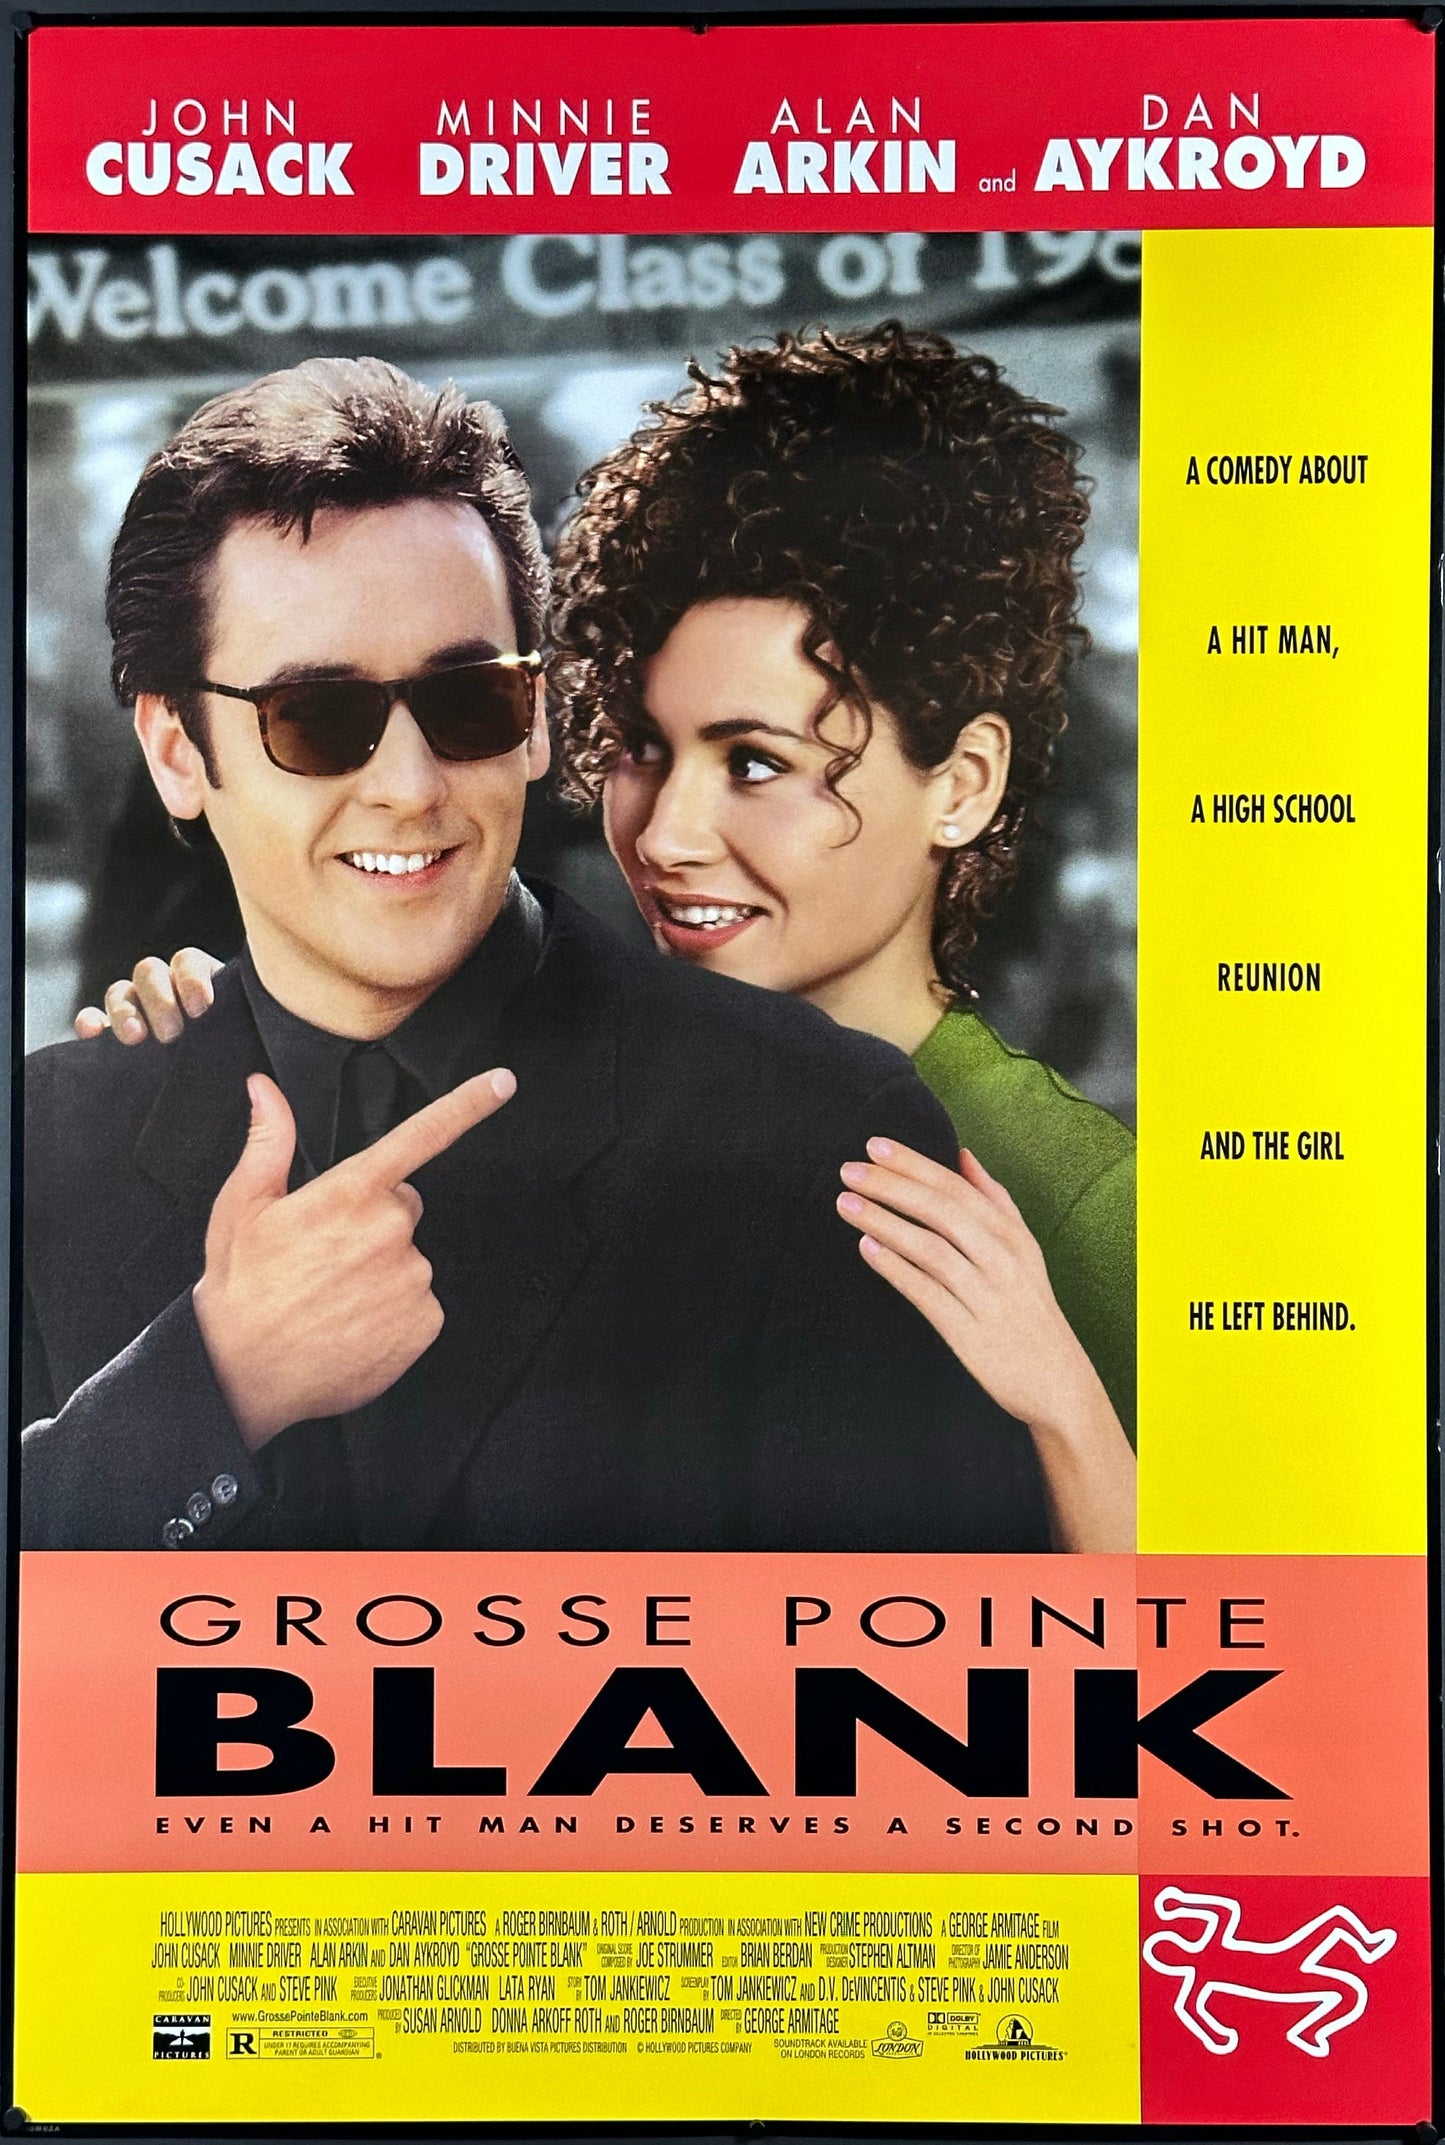 Grosse Pointe Blank US One Sheet (1997) - ORIGINAL RELEASE - posterpalace.com